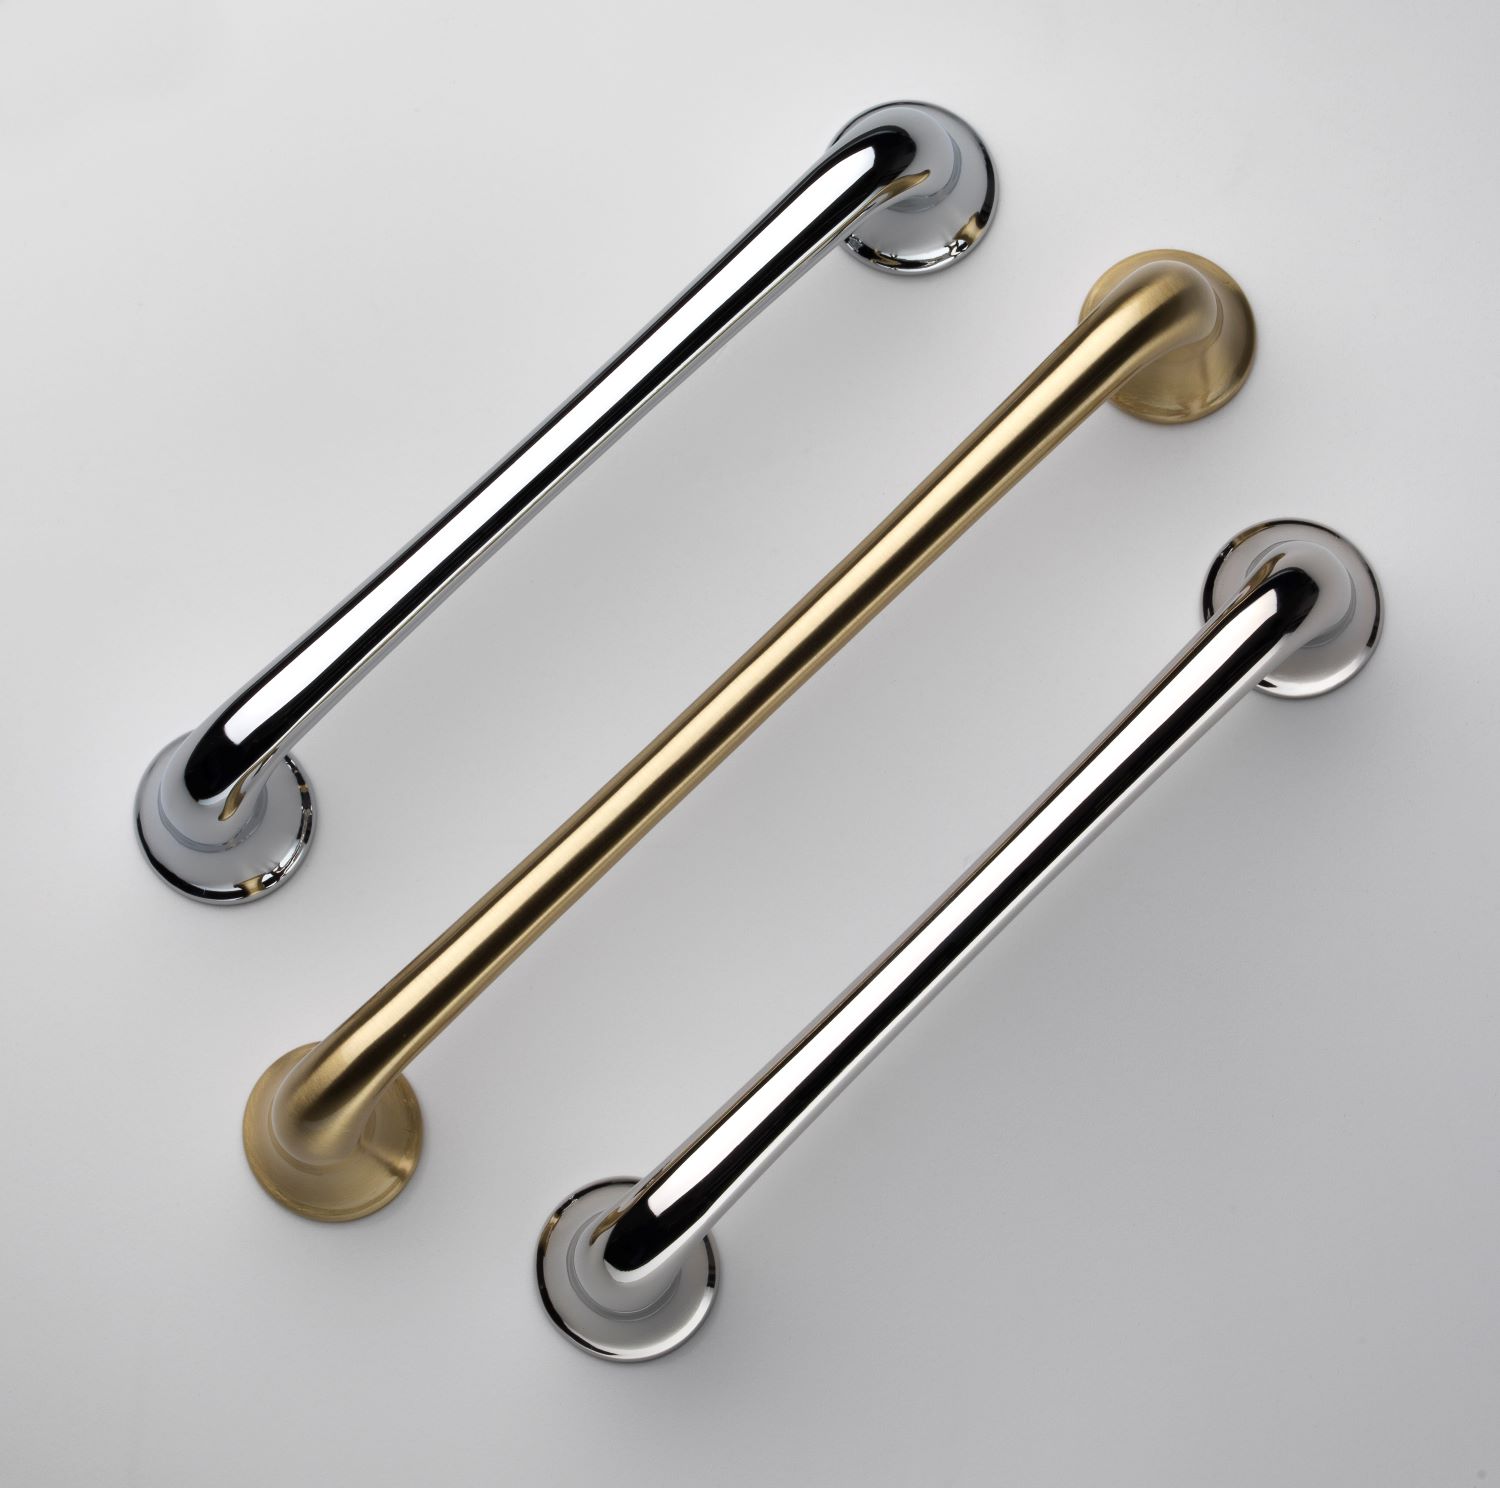 The Stormont cabinet handle range from Crofts & Assinder's Special Works Collection